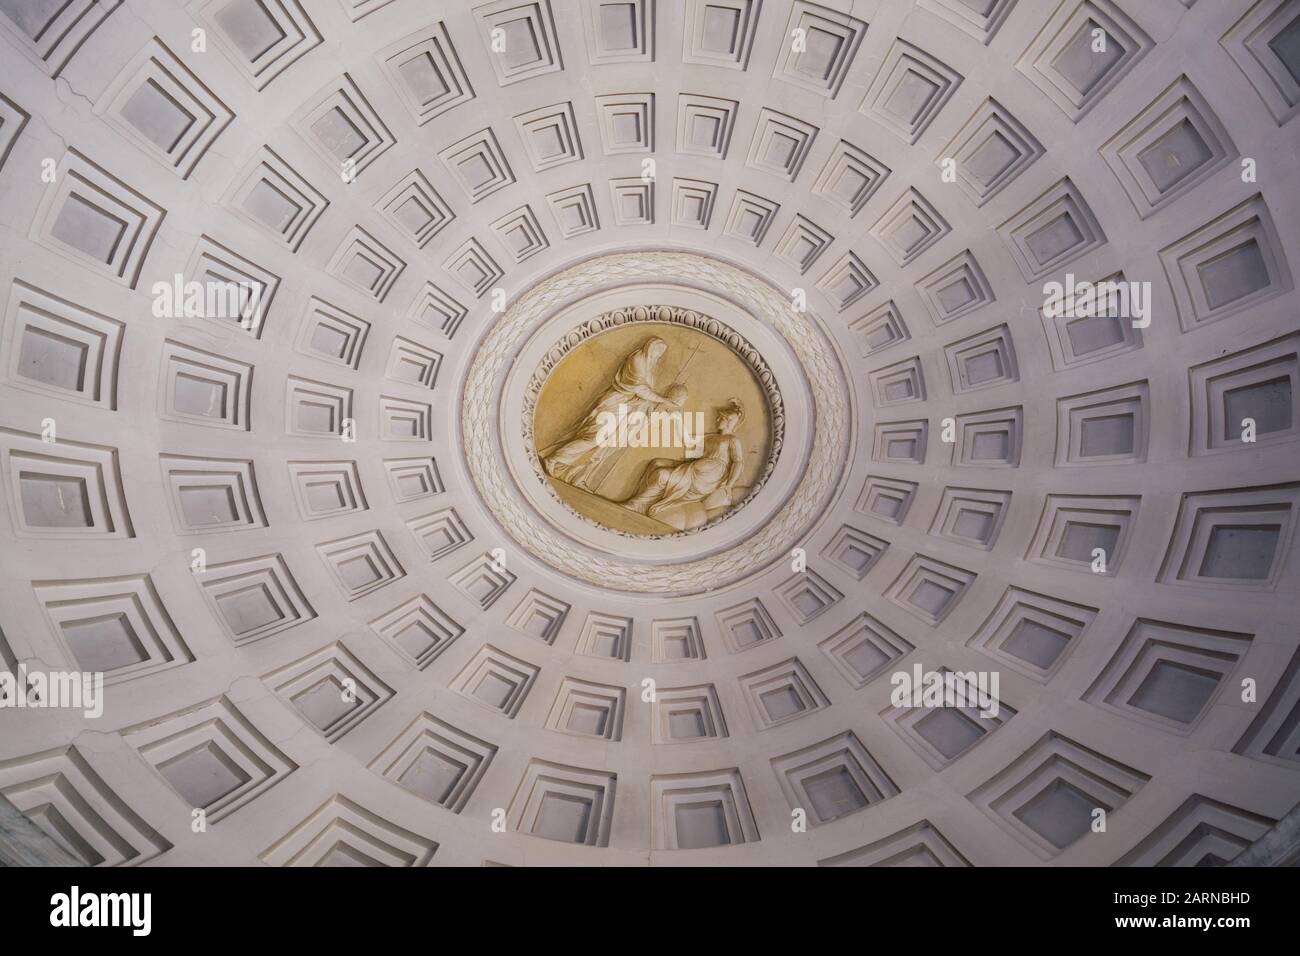 Rome, Italy - Jan 3, 2020: Inside the Vatican Museum. Vatican, Rome, Italy. Stock Photo